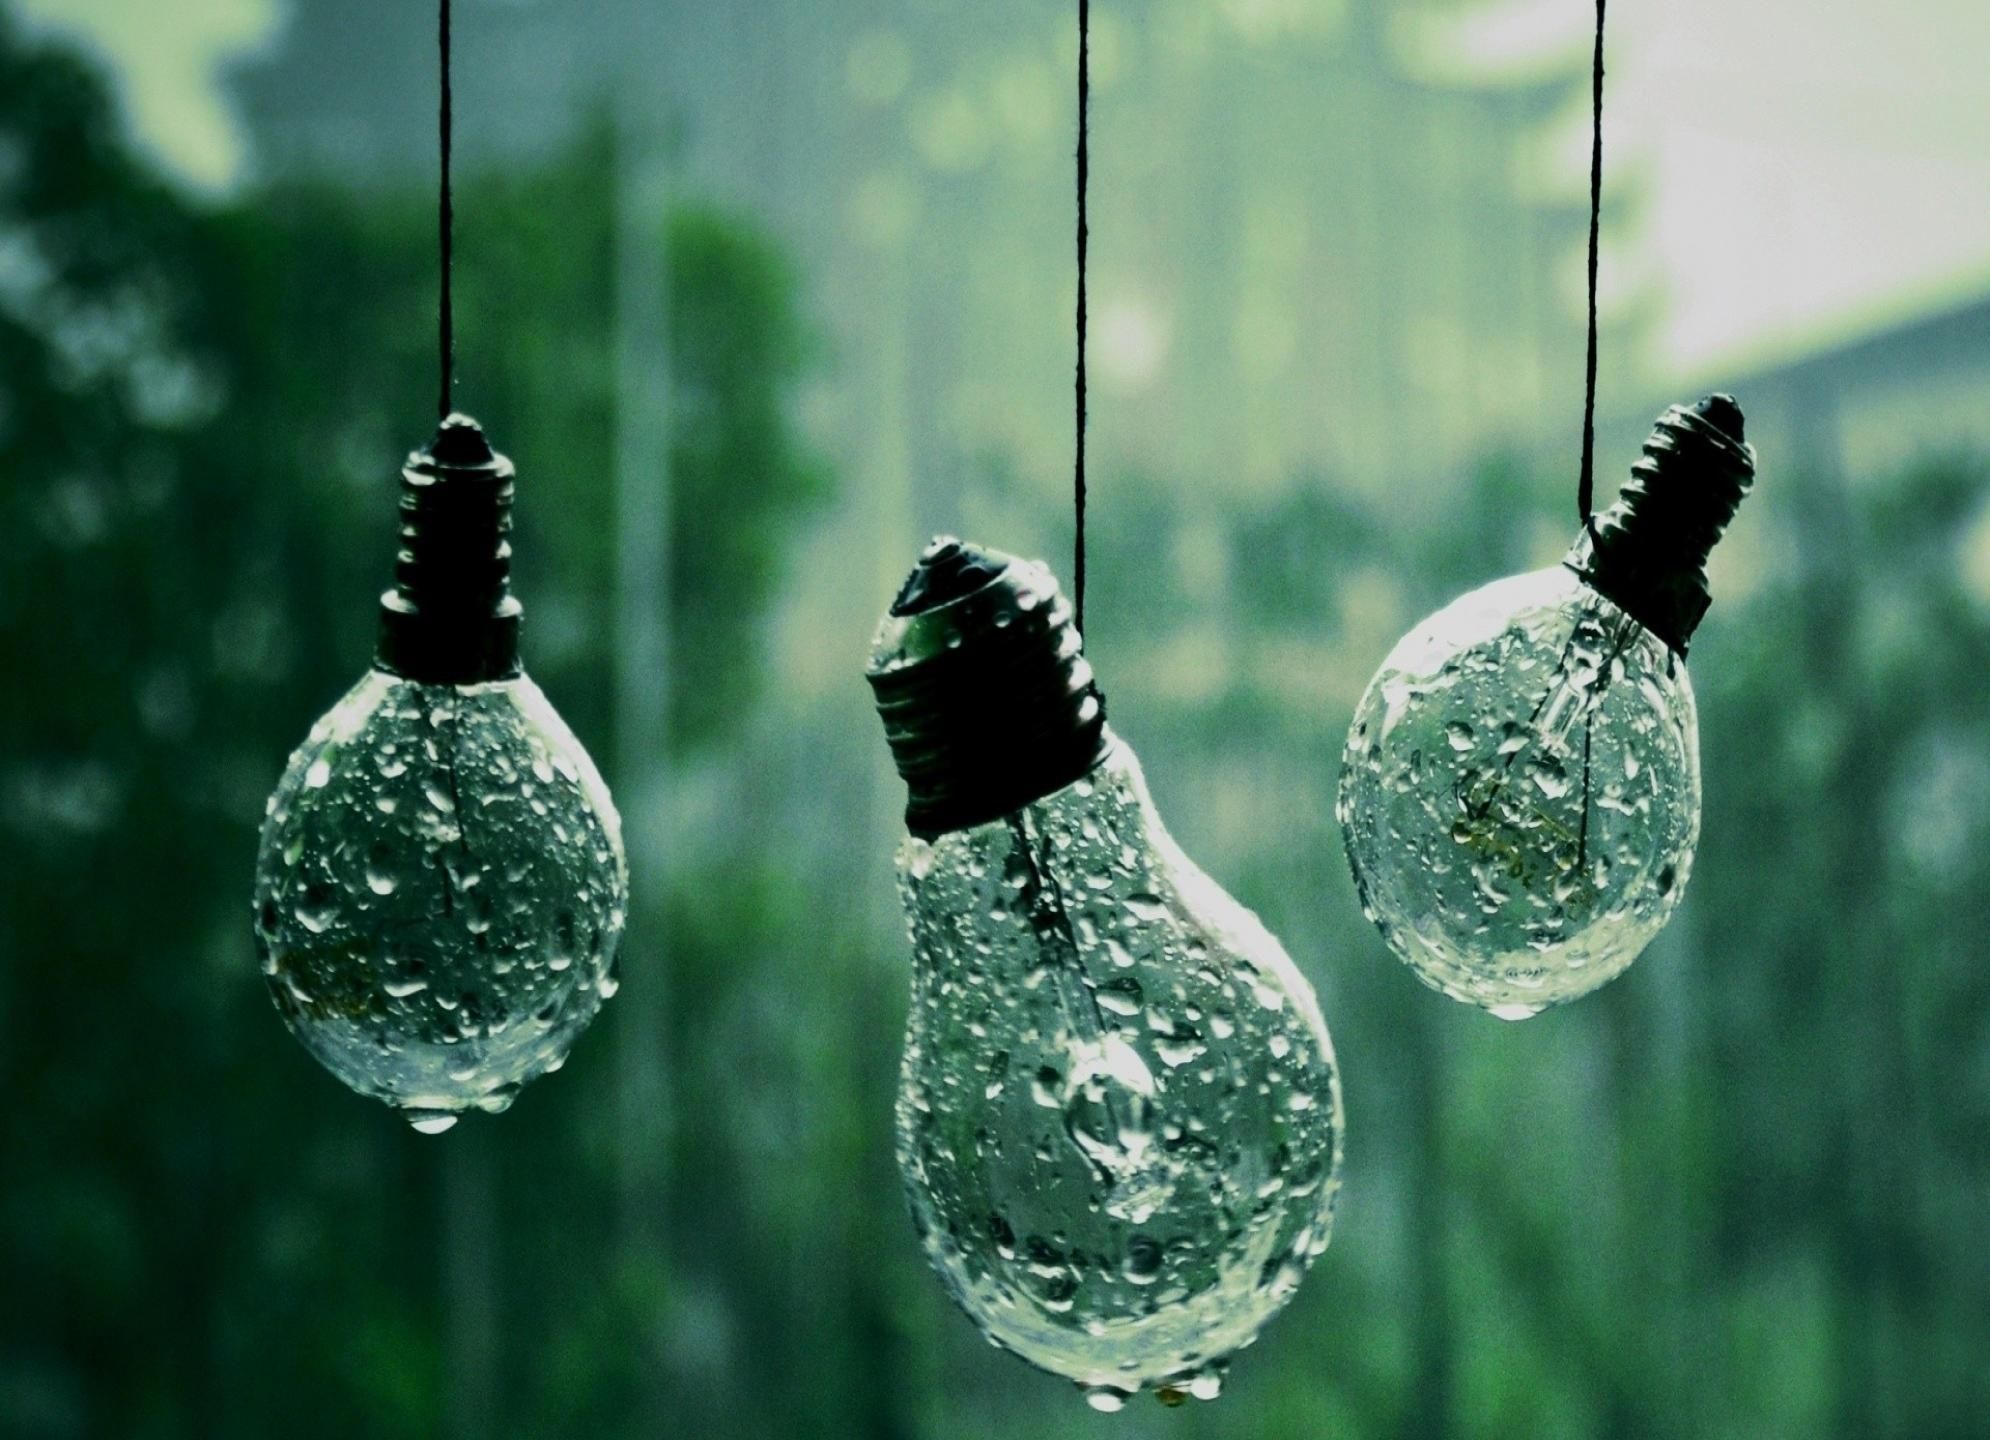 A group of light bulbs hanging from strings - Rain, sage green, lime green, soft green, light green